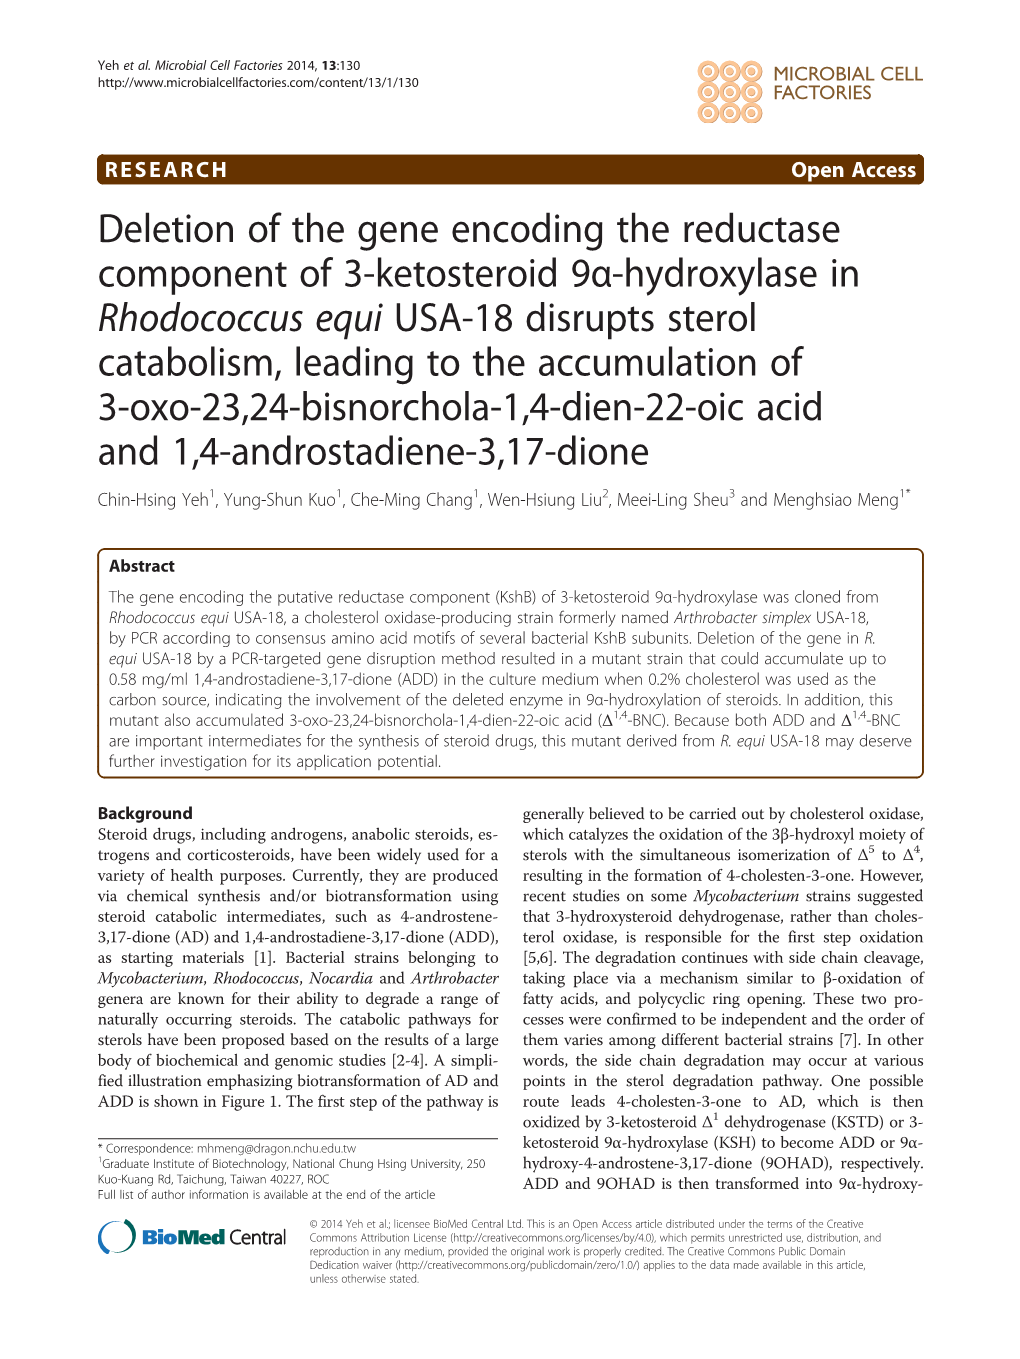 Deletion of the Gene Encoding the Reductase Component of 3